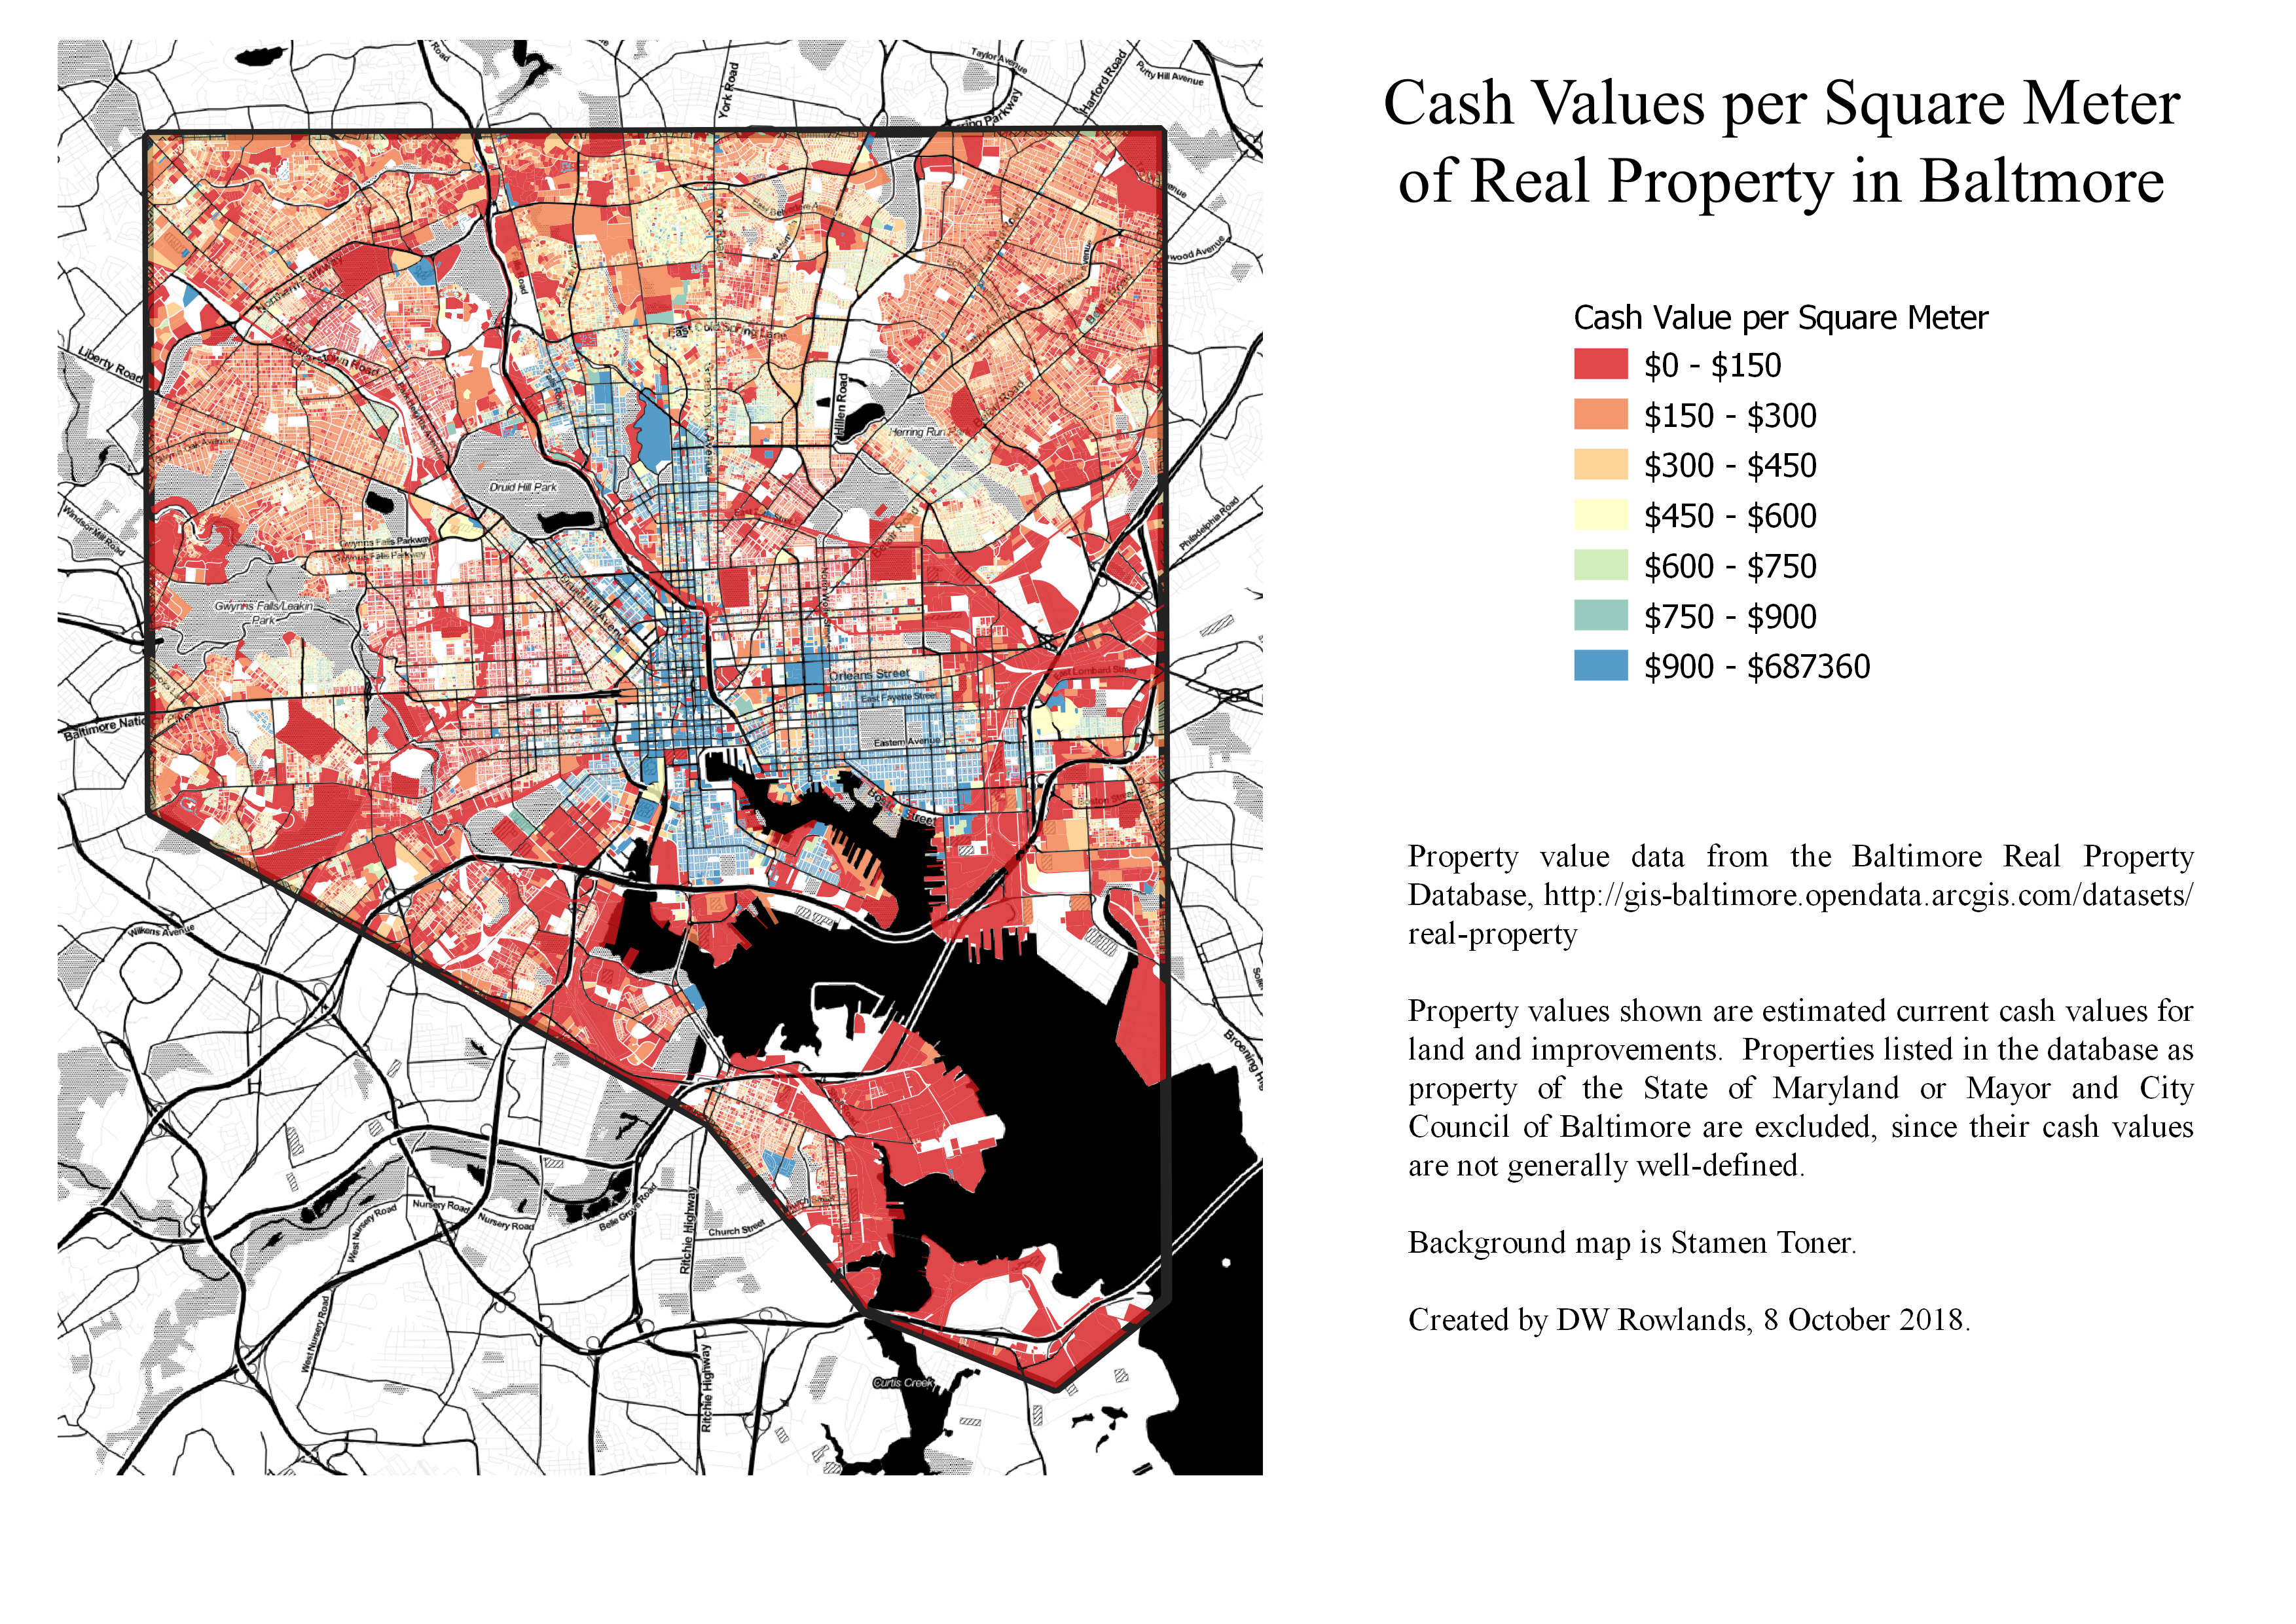 Map of real property valuesin Baltimore City based on data from the Baltimore Real Property Database